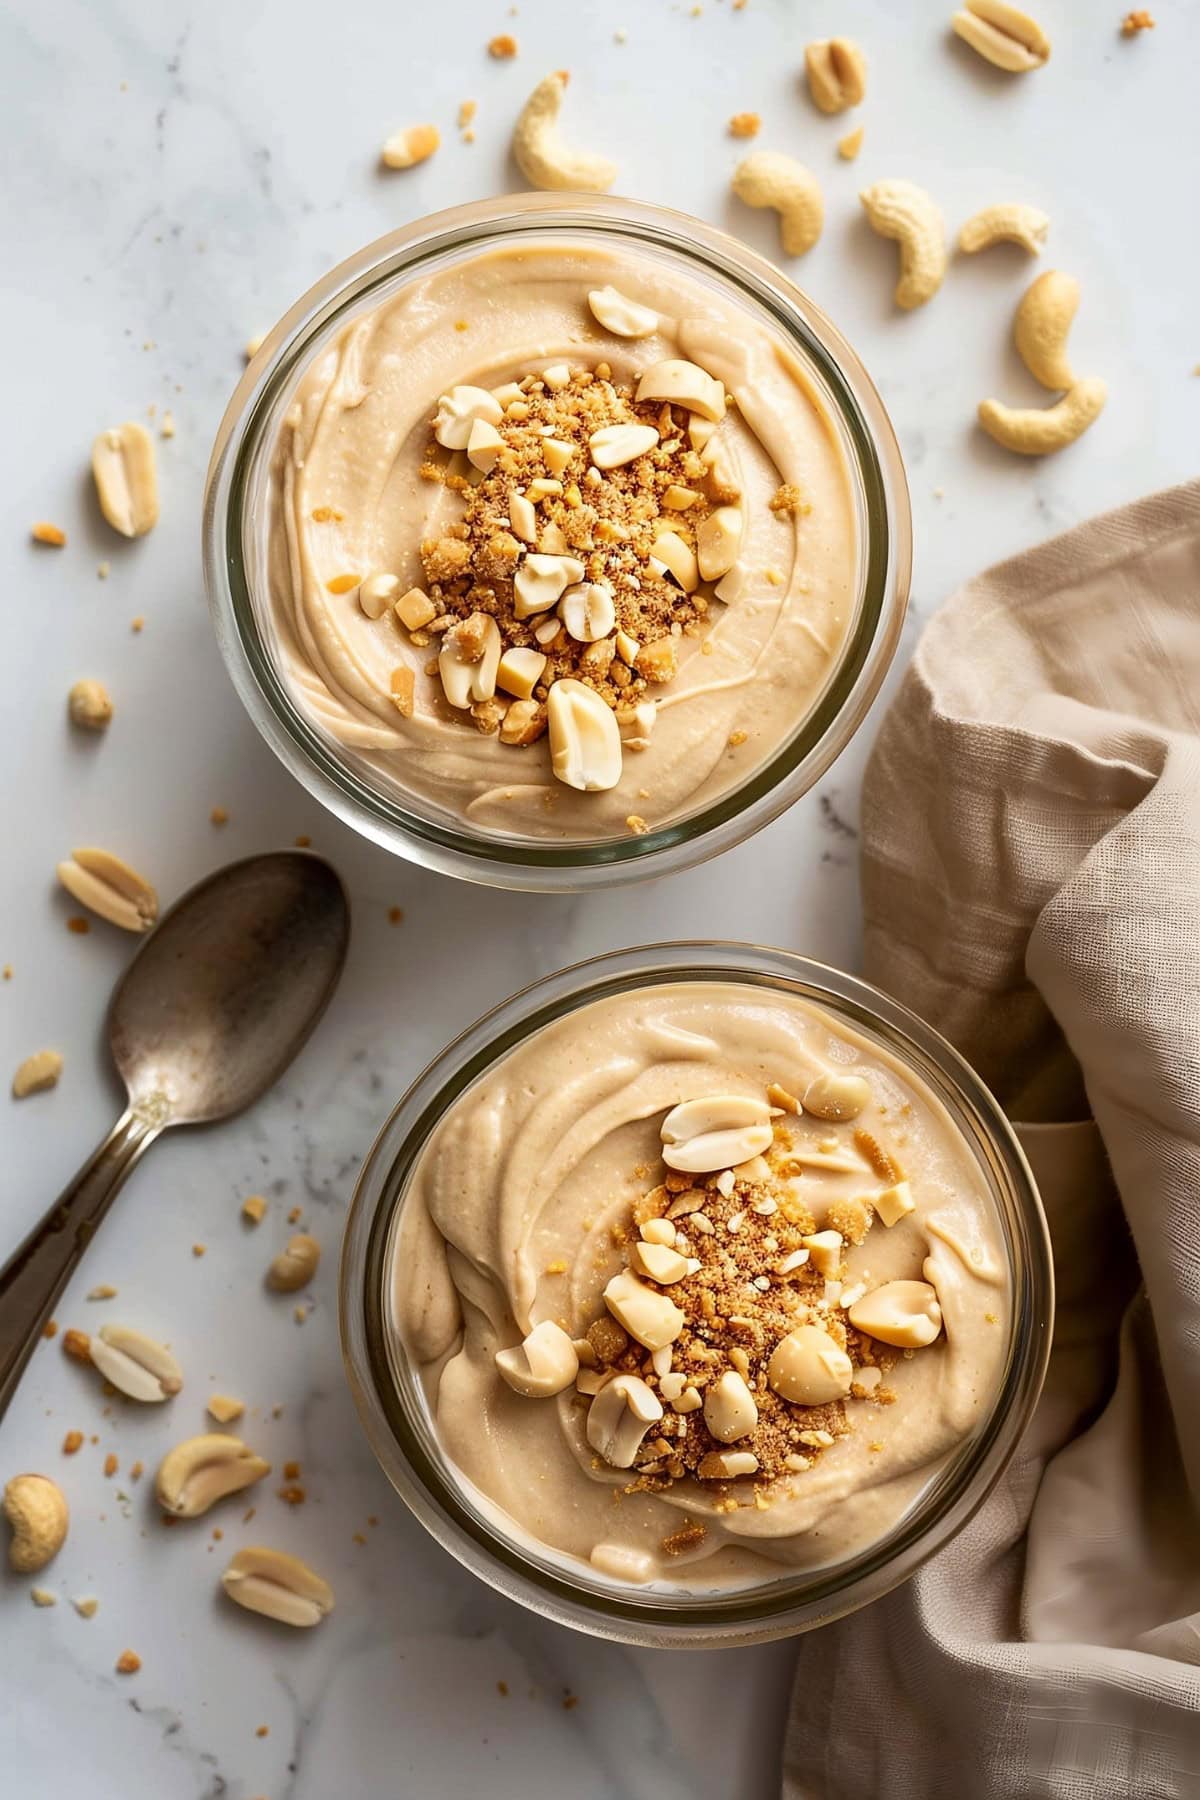 Two glasses of peanut butter mousse with crunchy crushed nuts